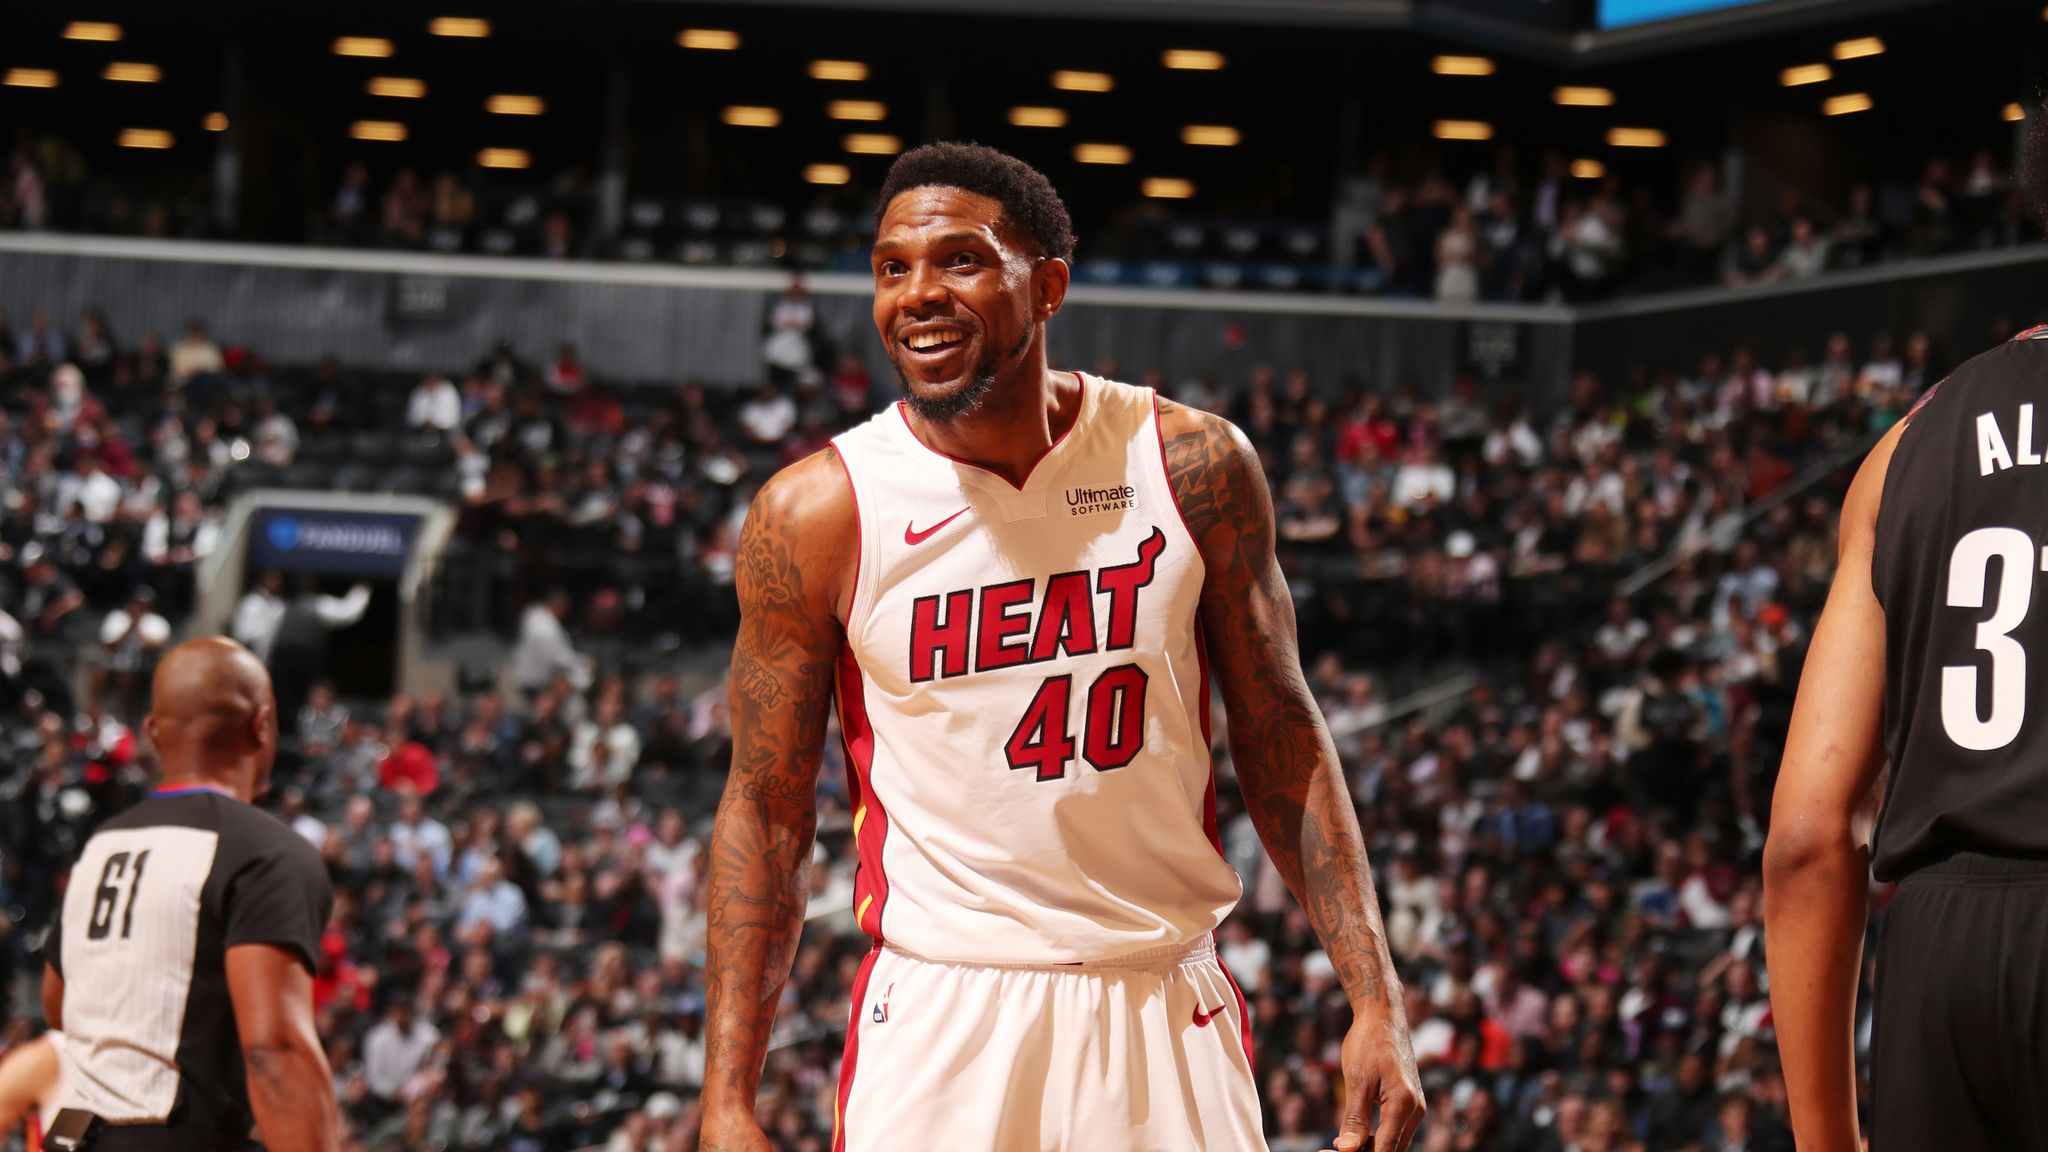 Udonis Haslem retires at 42: Miami Heat stalwart and three-time